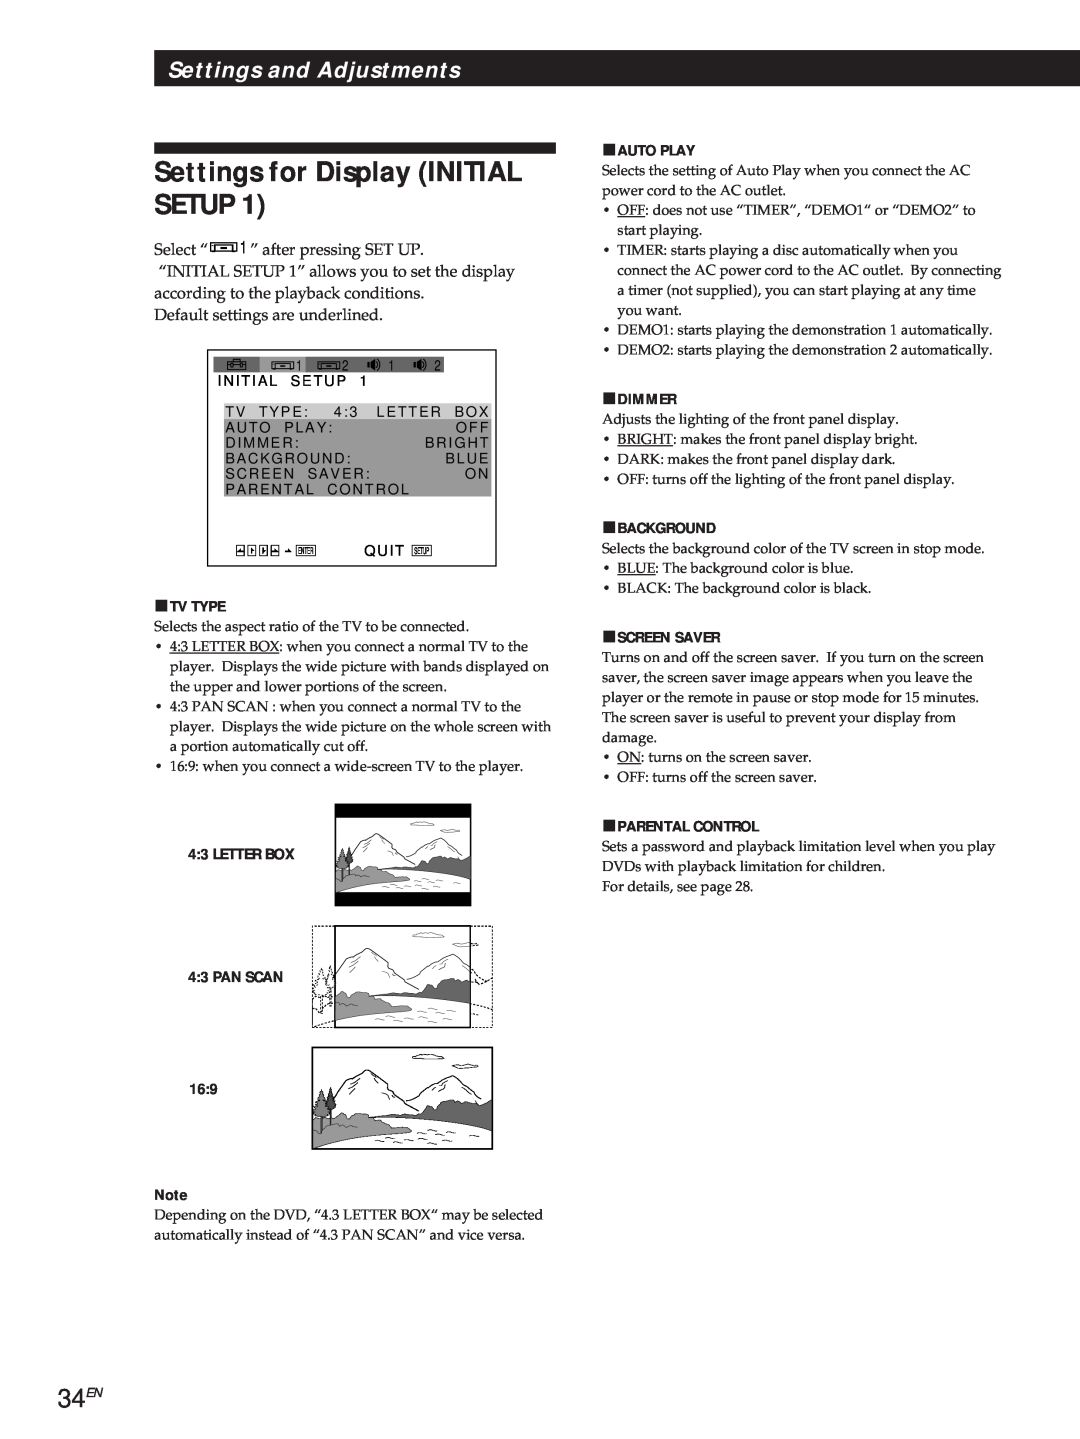 Sony DVP-S500D manual Settings for Display INITIAL SETUP, 34EN, Settings and Adjustments, pTV TYPE, pAUTO PLAY, pDIMMER 